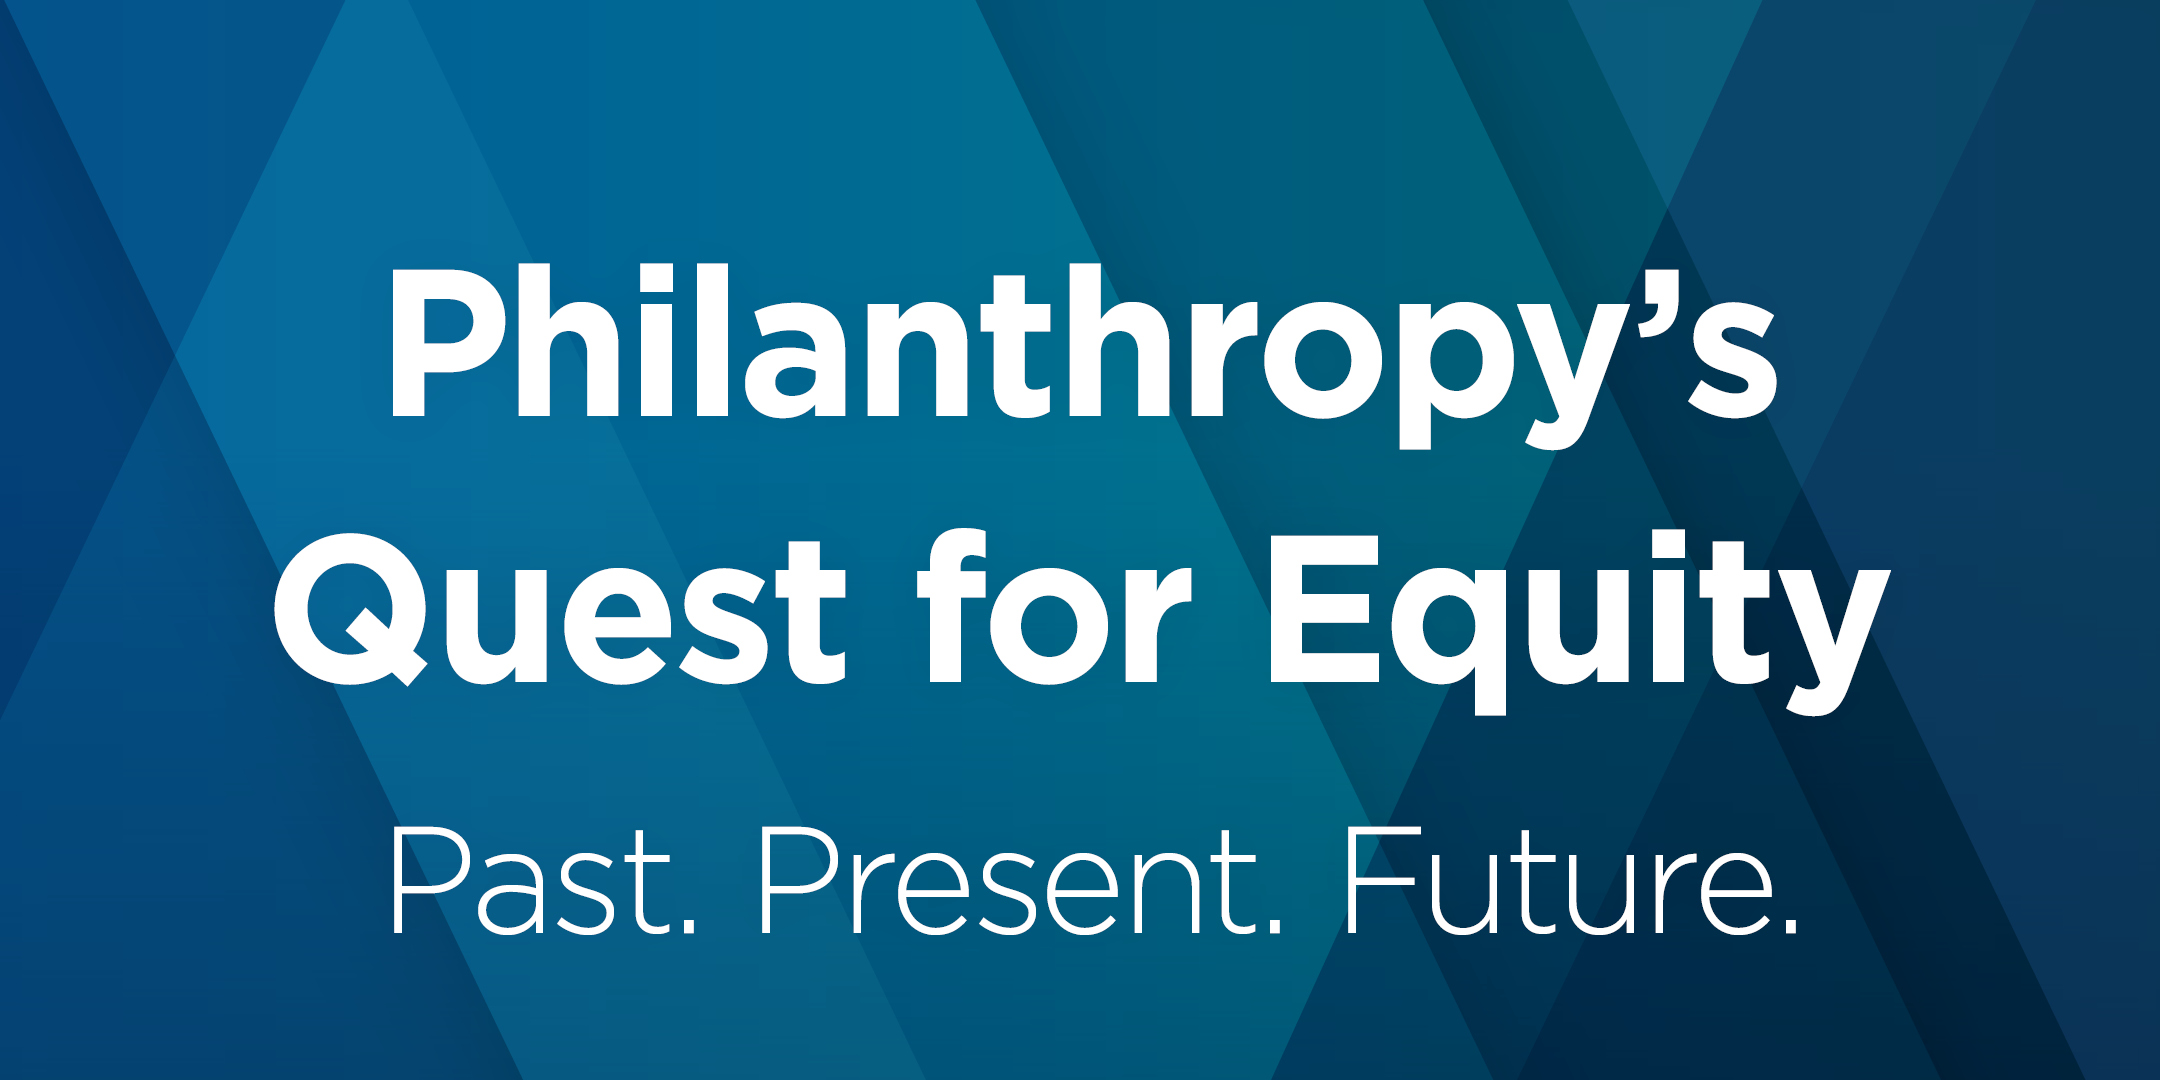 Philanthropy's Quest for Equity: Past. Present. Future.